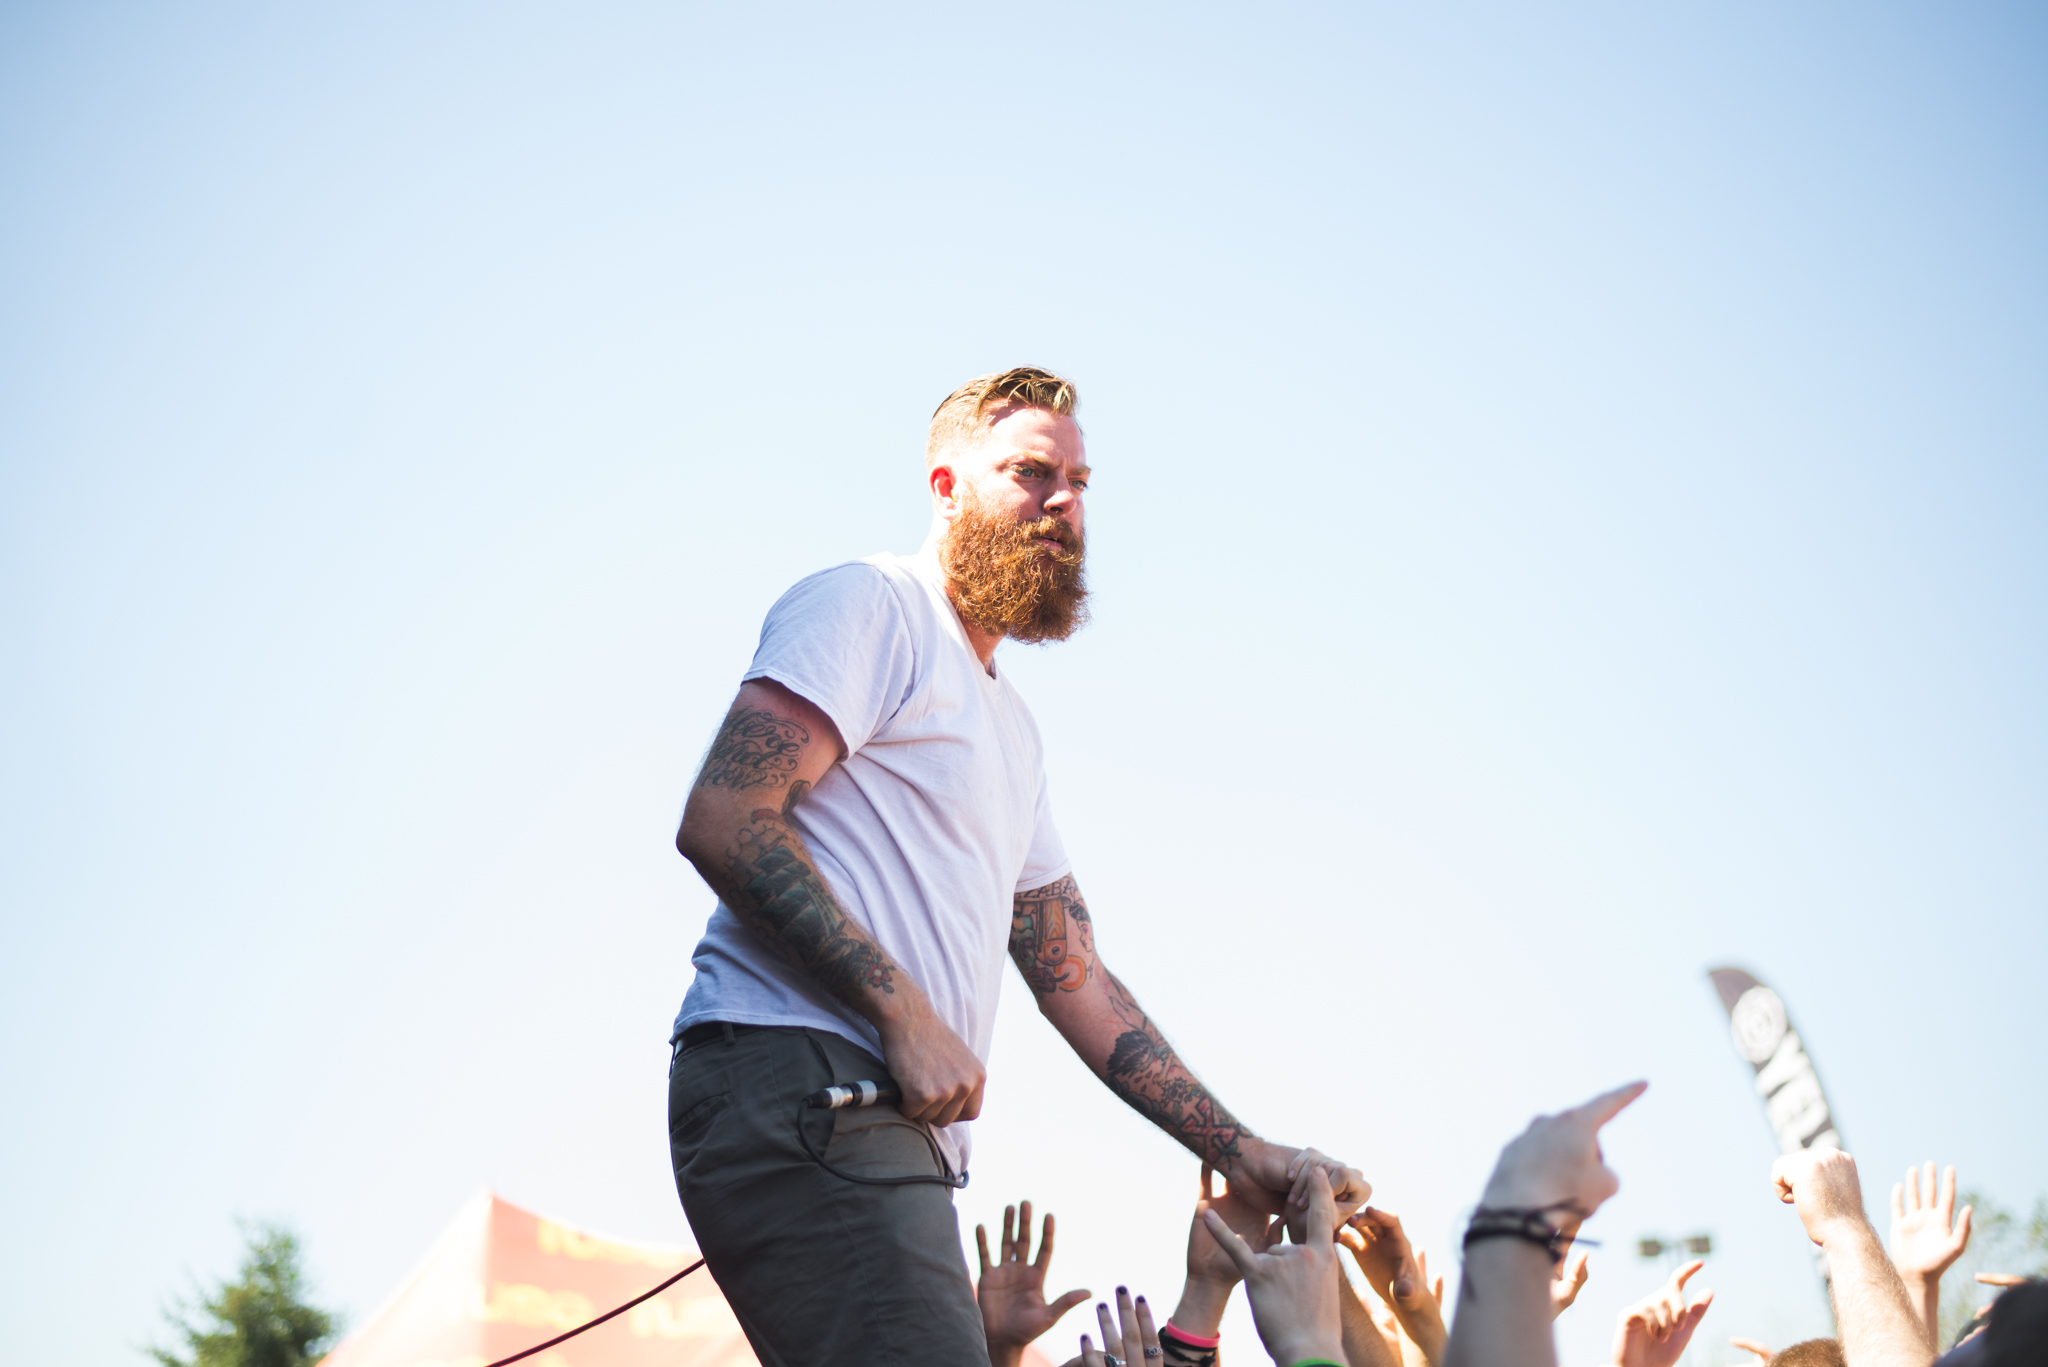 Four Year Strong - Photo by Lindsey Blane